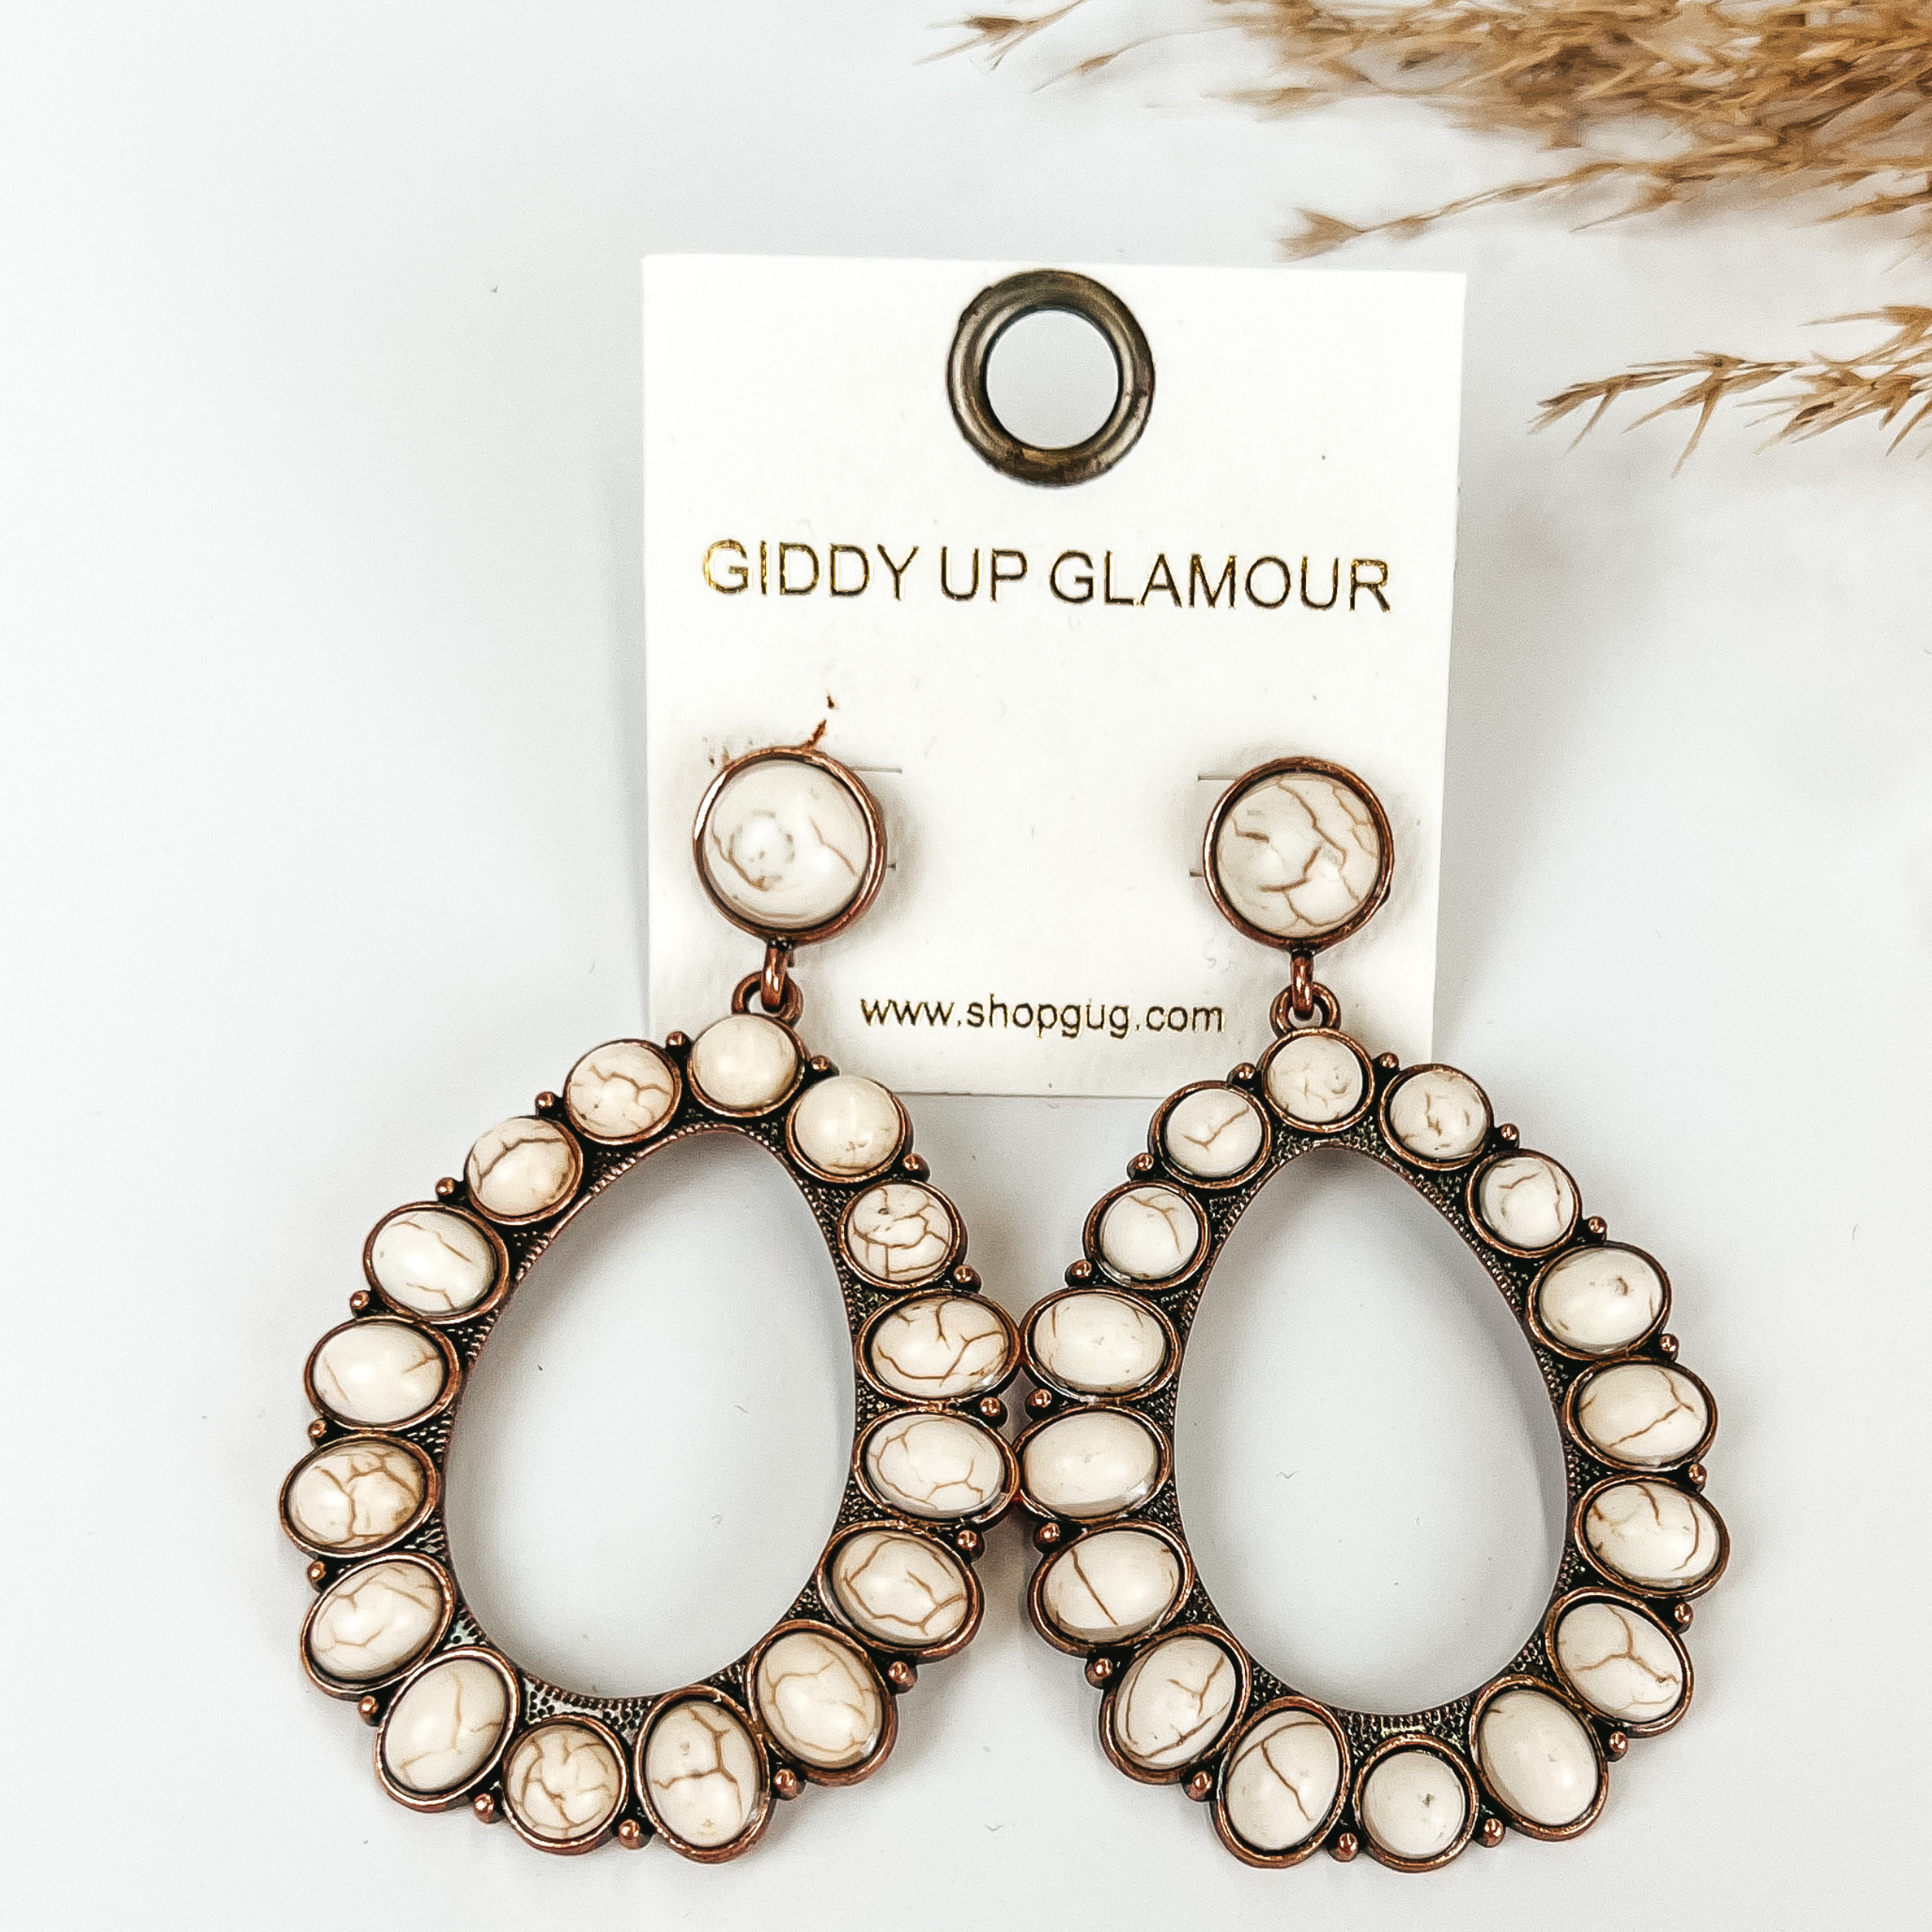 White stoned teardrop earrings, with pompous grass in the top right hand corner, on a white background.